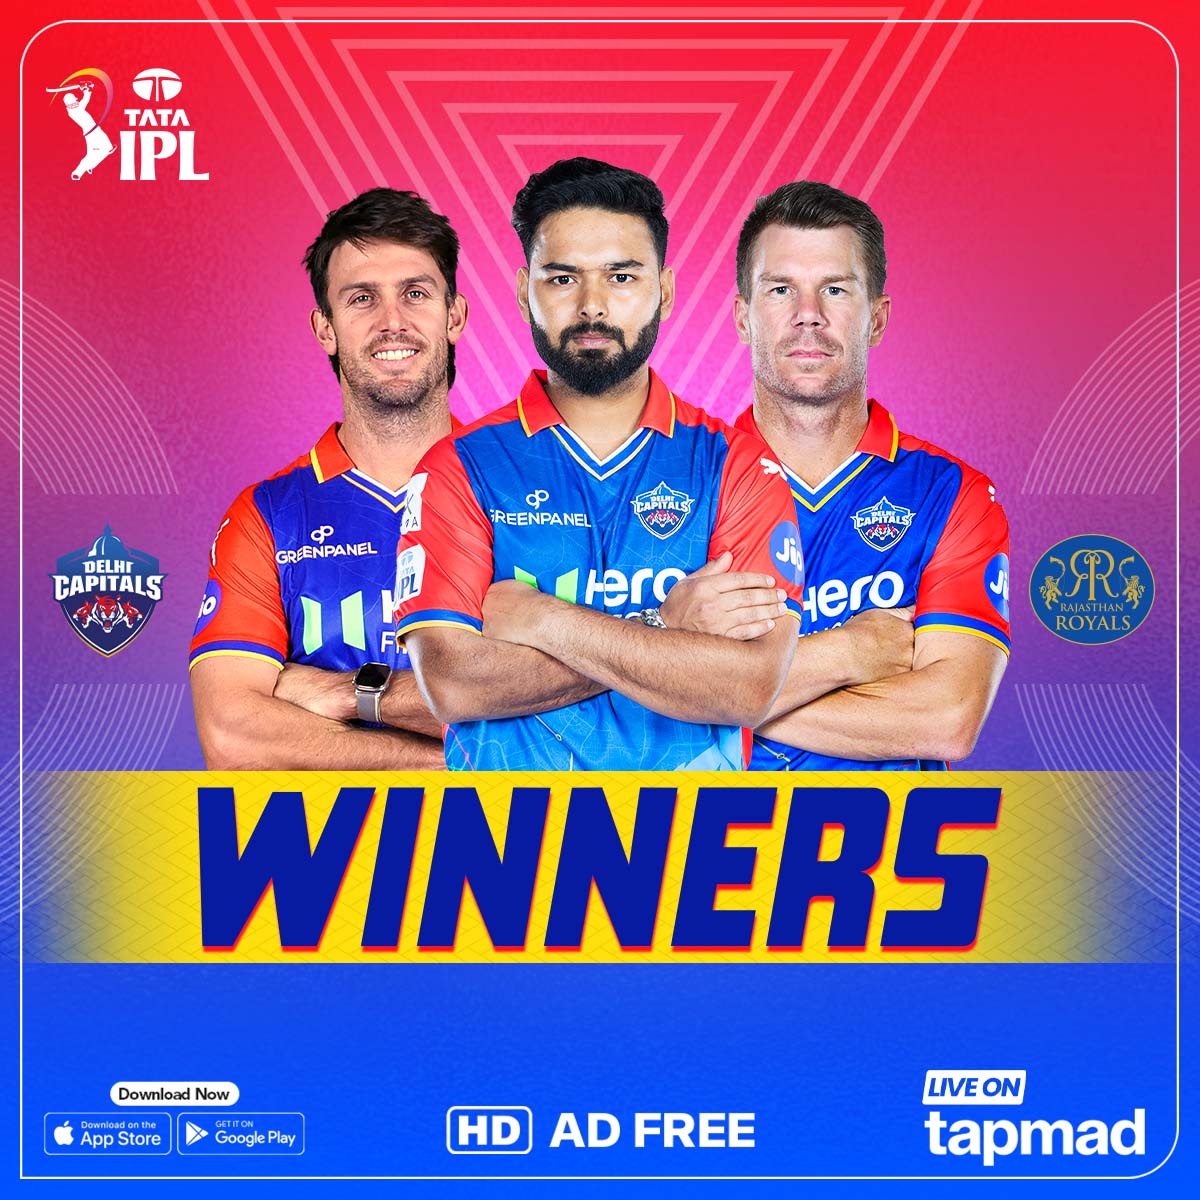 A crucial win for Delhi in the hunt for the playoffs! 🏏

And with that win, Delhi Capitals move to number 5⃣ on the Points Table.

#DCvsRR | #TATAIPL | #HojaoAdFree | #tapmad